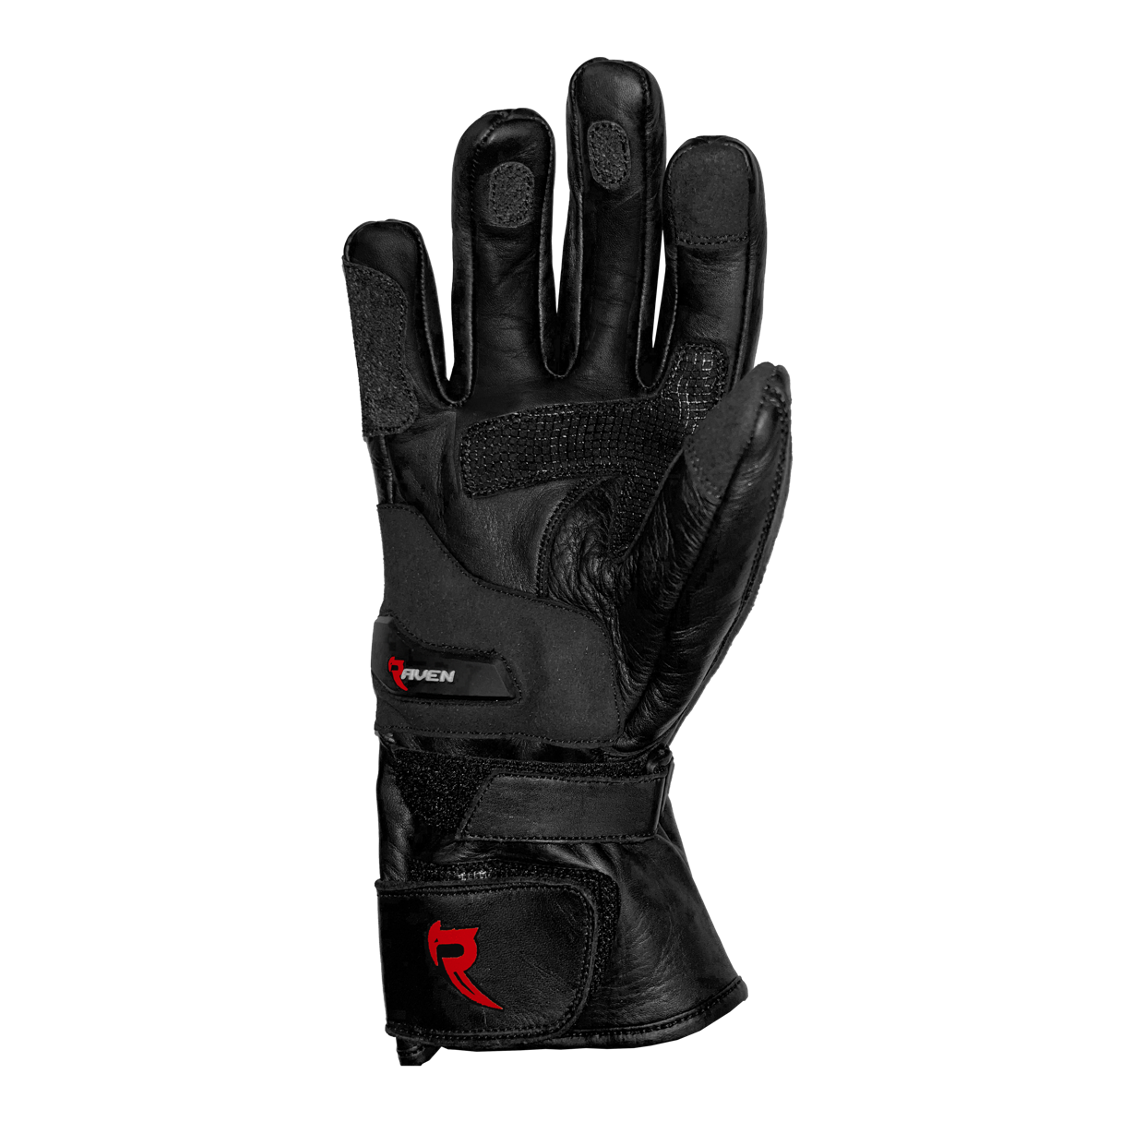 ROGUE - Black and RED Leather Motorcycle Long Cuff Gauntlet Glove by RAVEN Moto